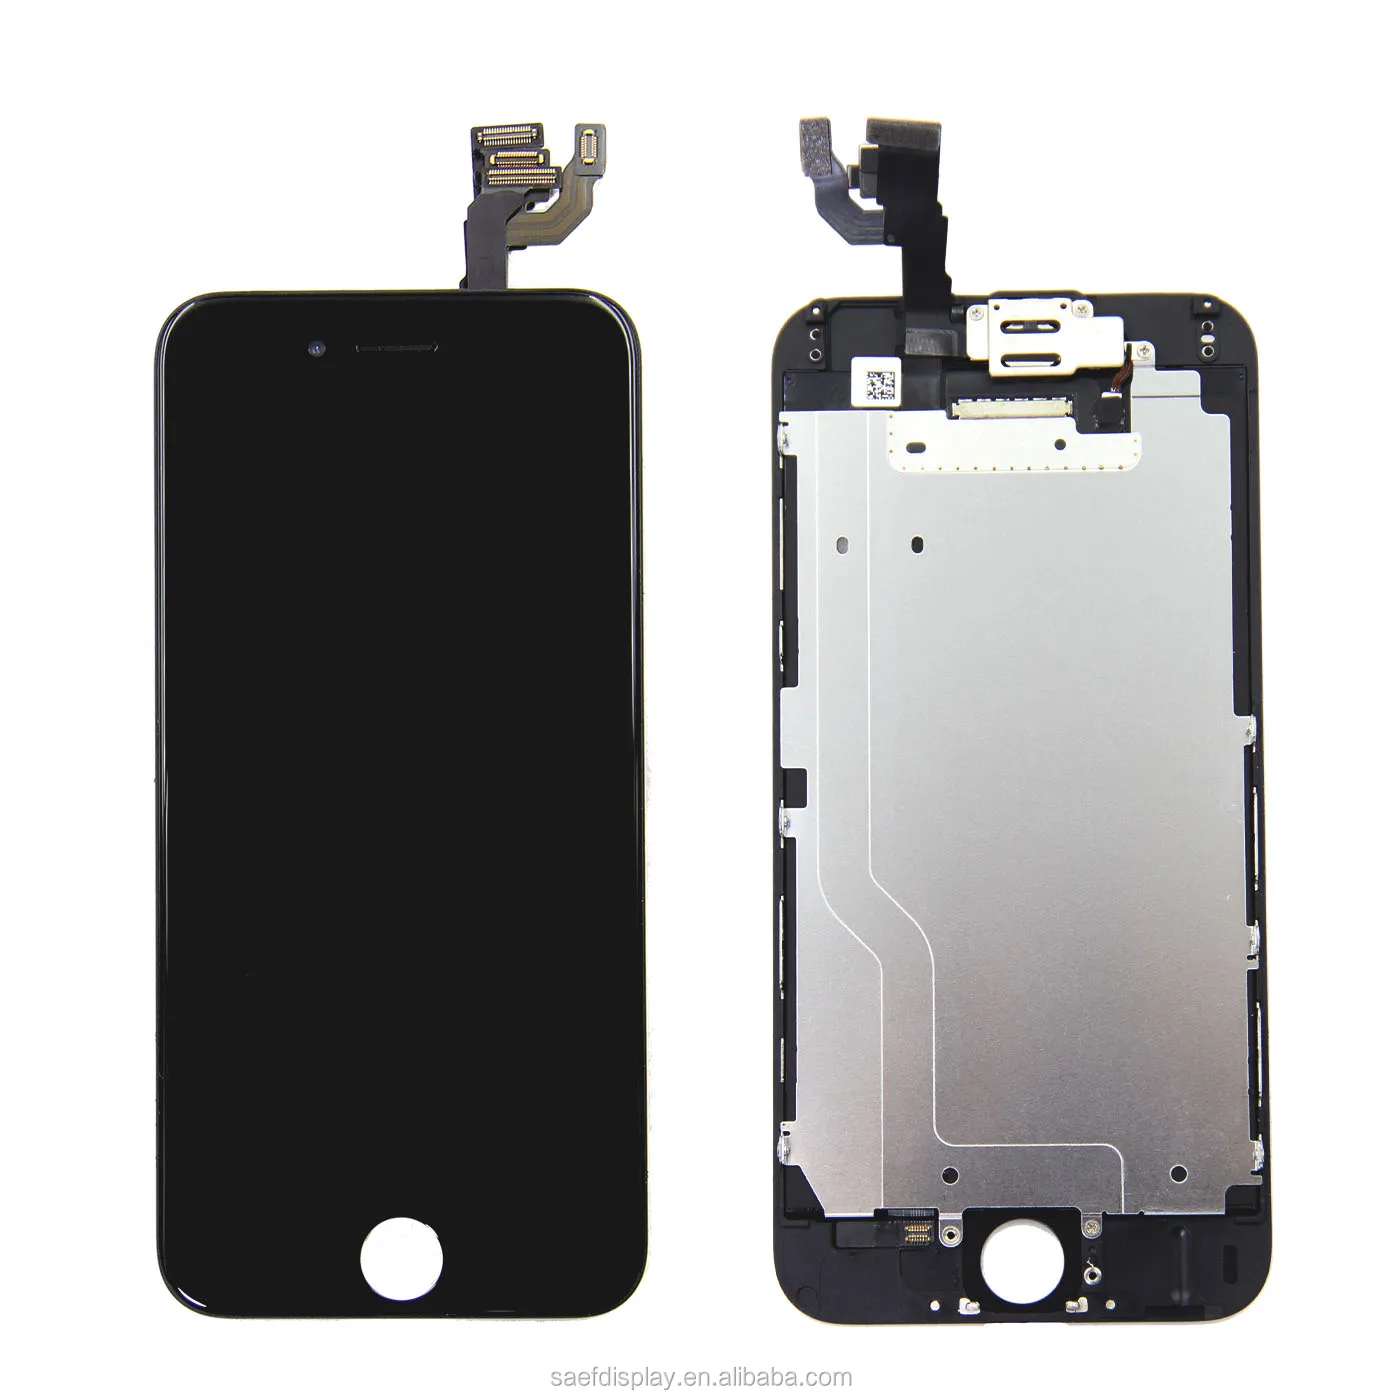 

Original cell phone mobile lcds for iPhone 5c 5s 5g 6g 6p 6s 6sp 7g 8g 7p 8p original lcd replacement touch screen, Black white